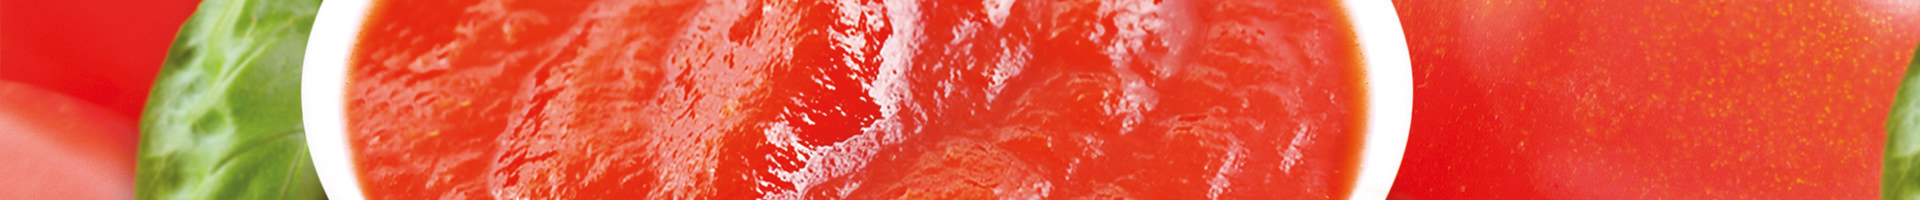 crushed tomato banner